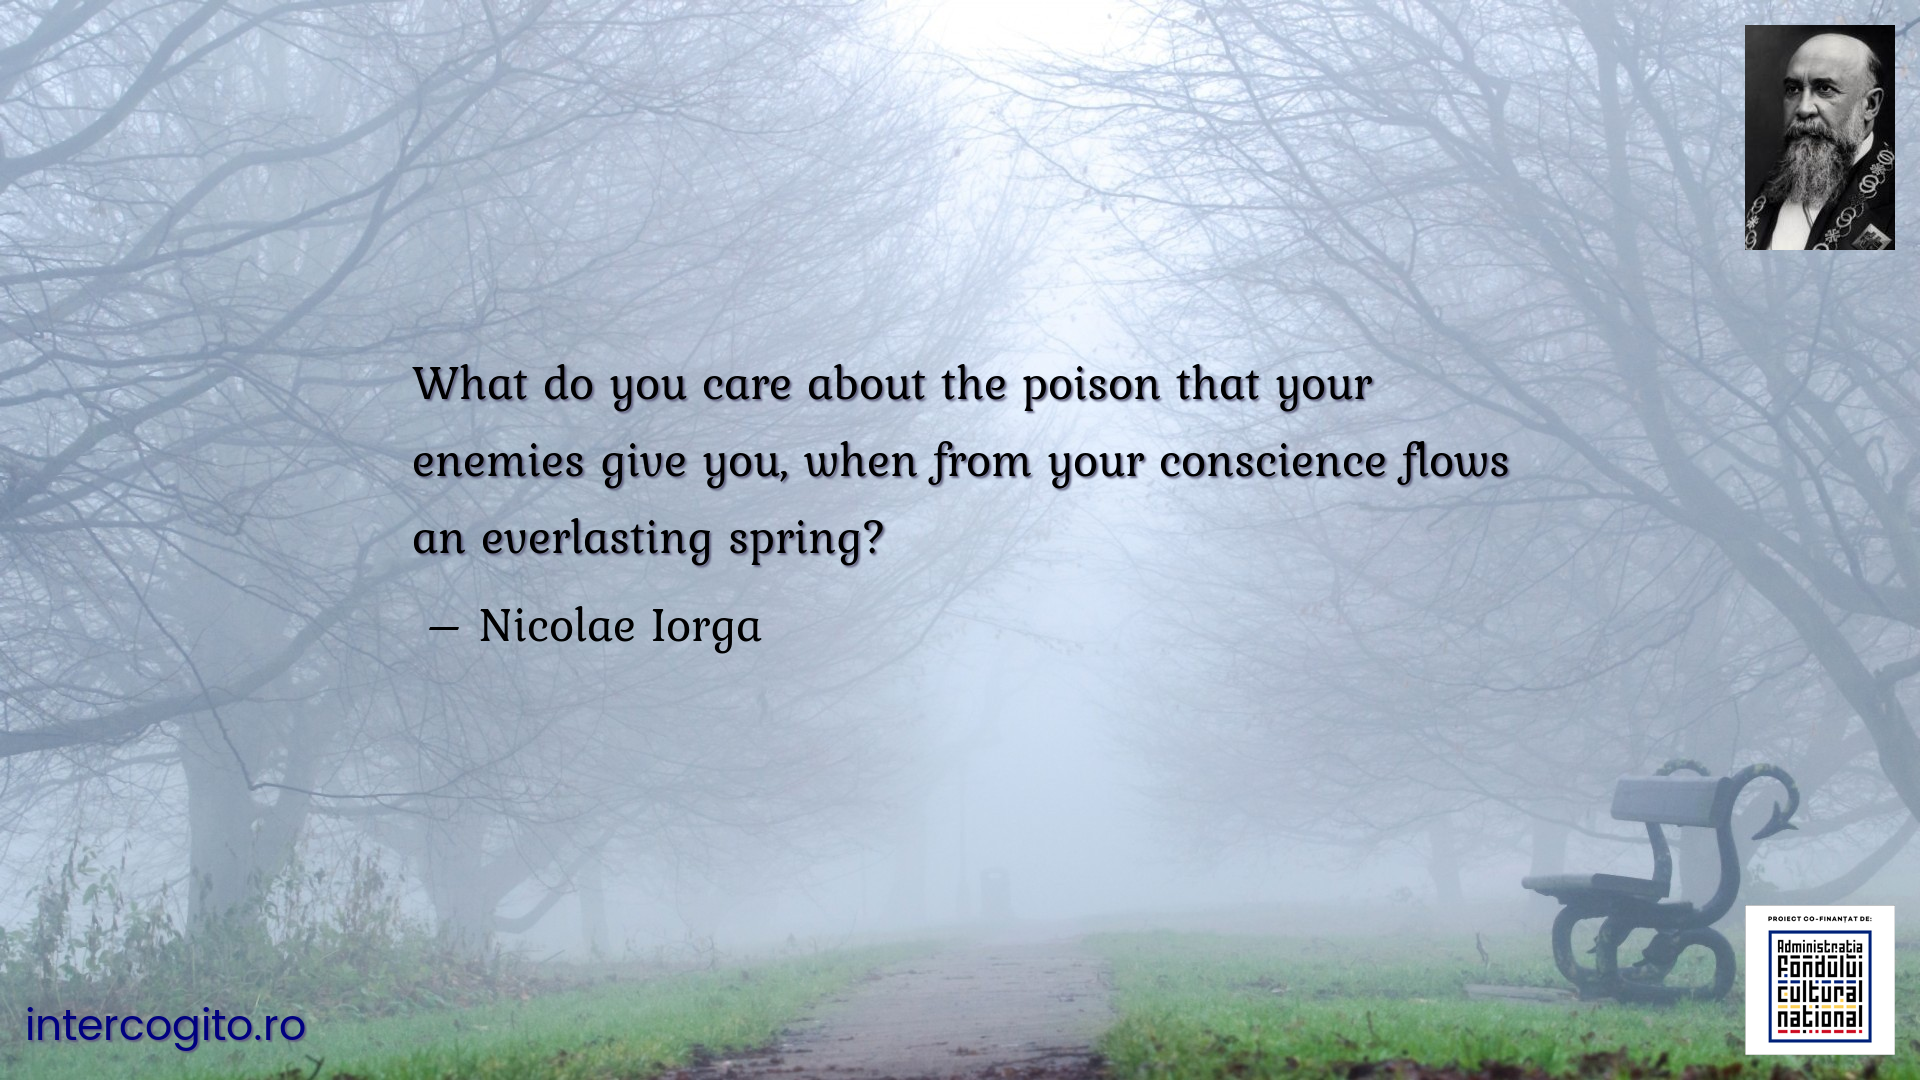 What do you care about the poison that your enemies give you, when from your conscience flows an everlasting spring?